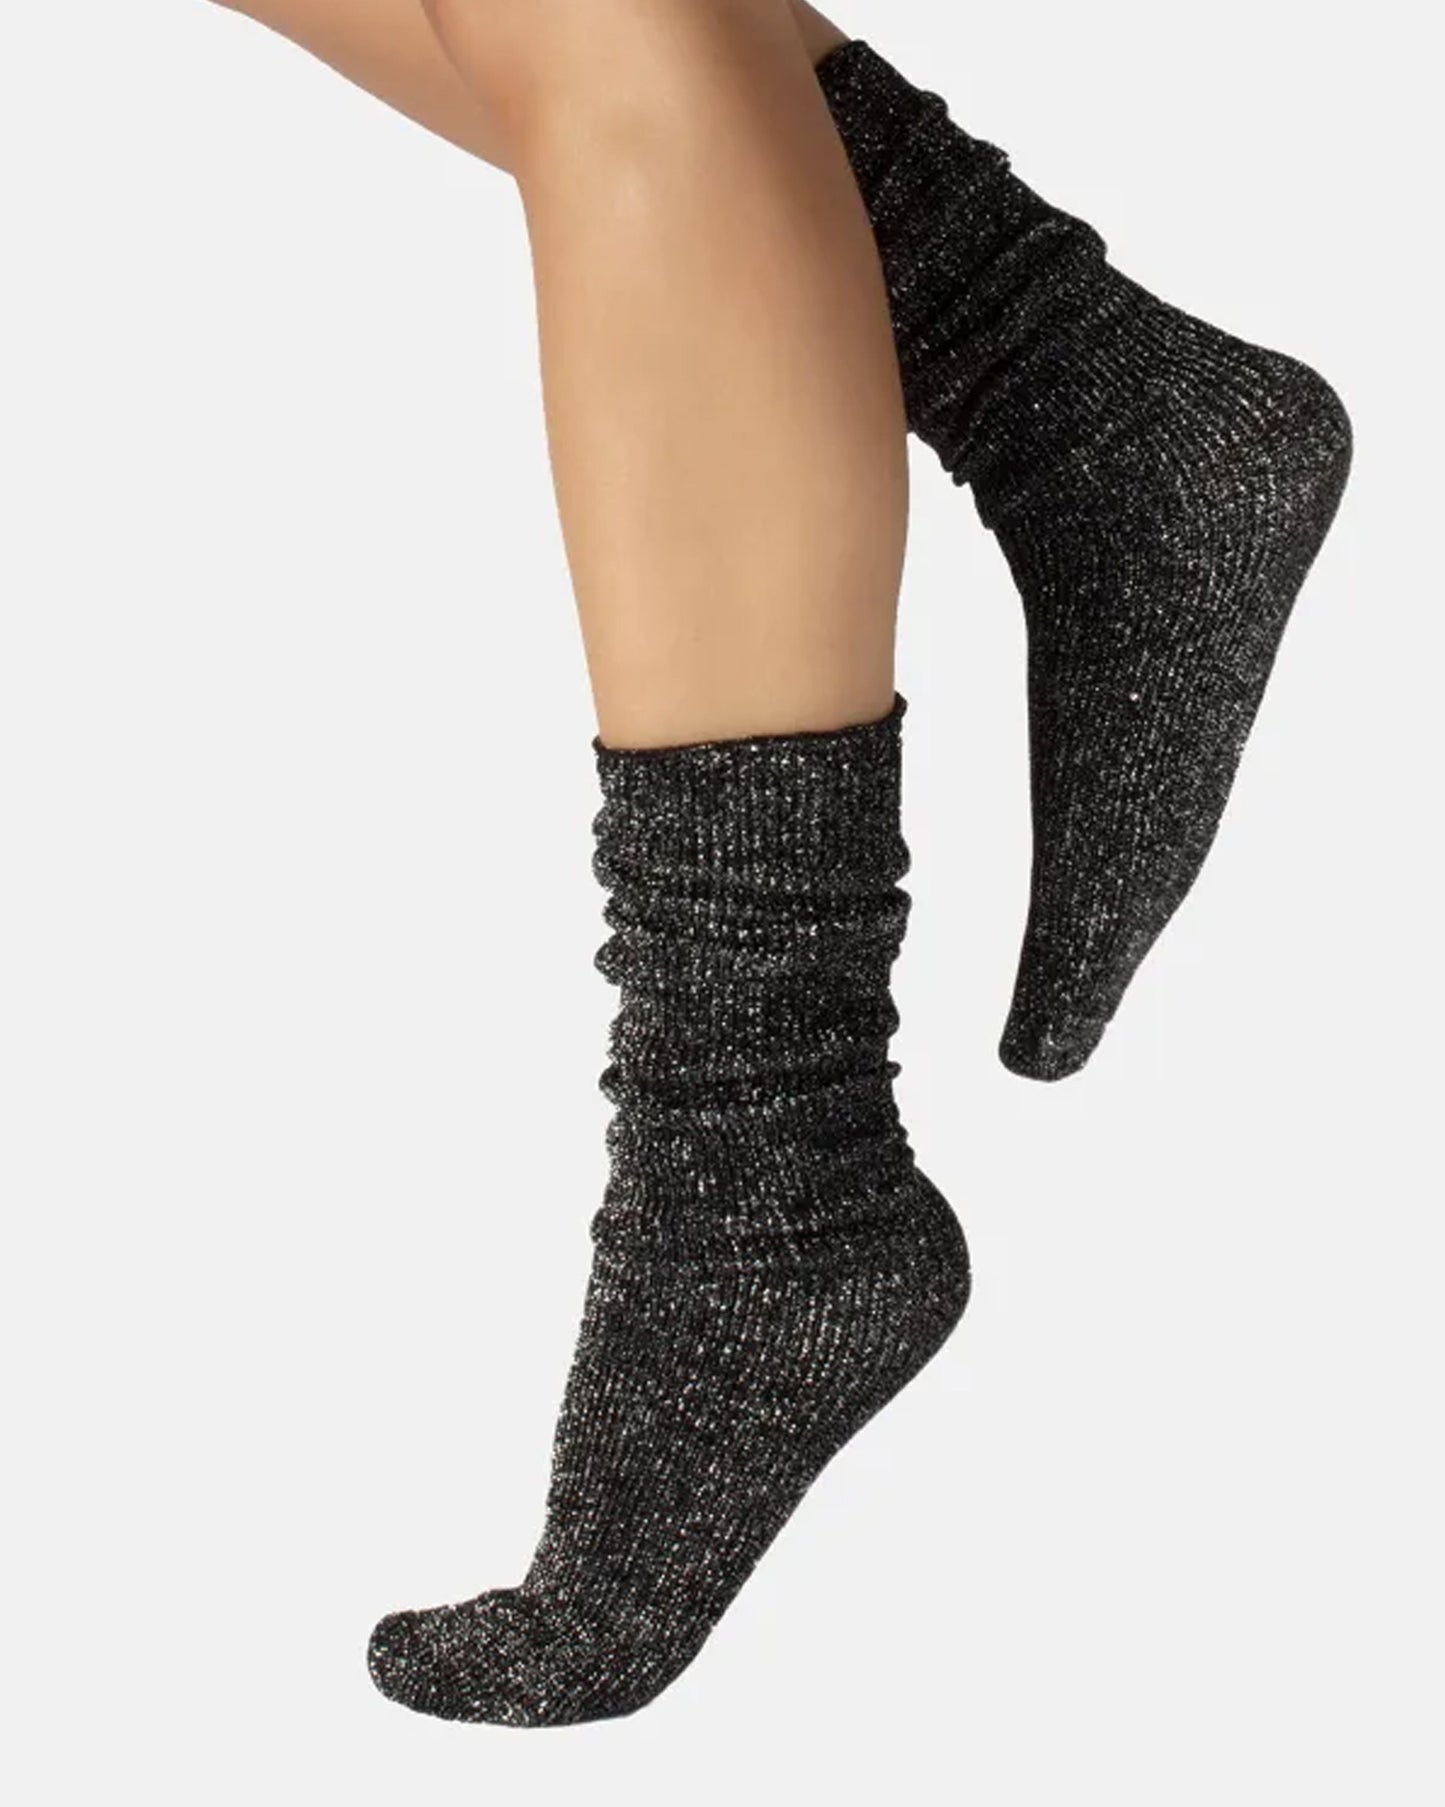 Calzitaly Glitter Rib Sock - Black opaque scrunched down ankle fashion ribbed socks with silver lamé